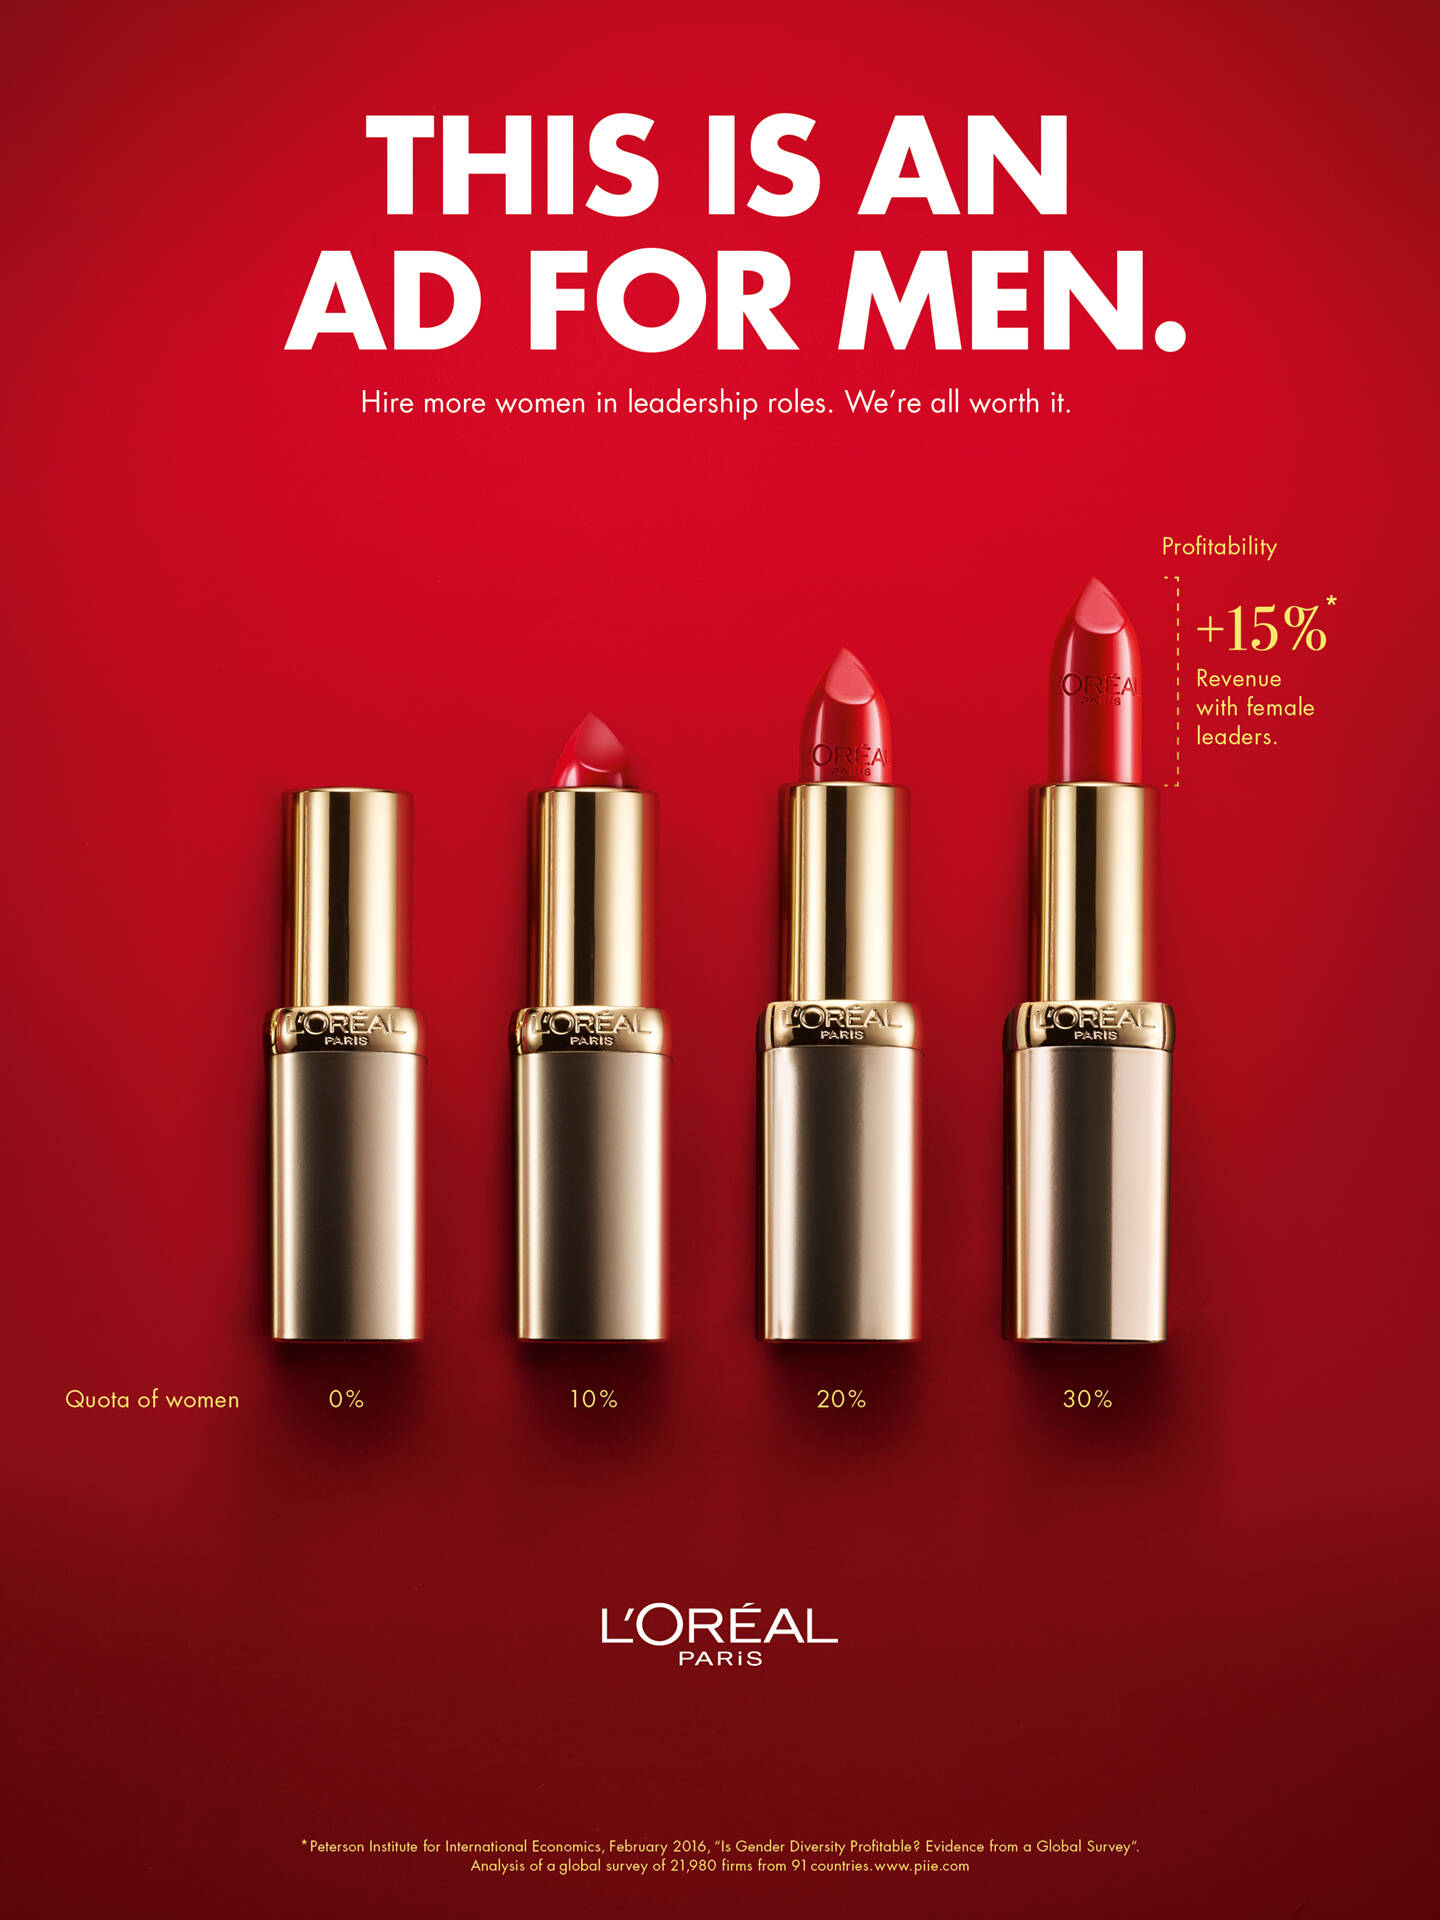 This is an ad for men. Hire more women in leadership roles. We're all worth it. - L'Oreal